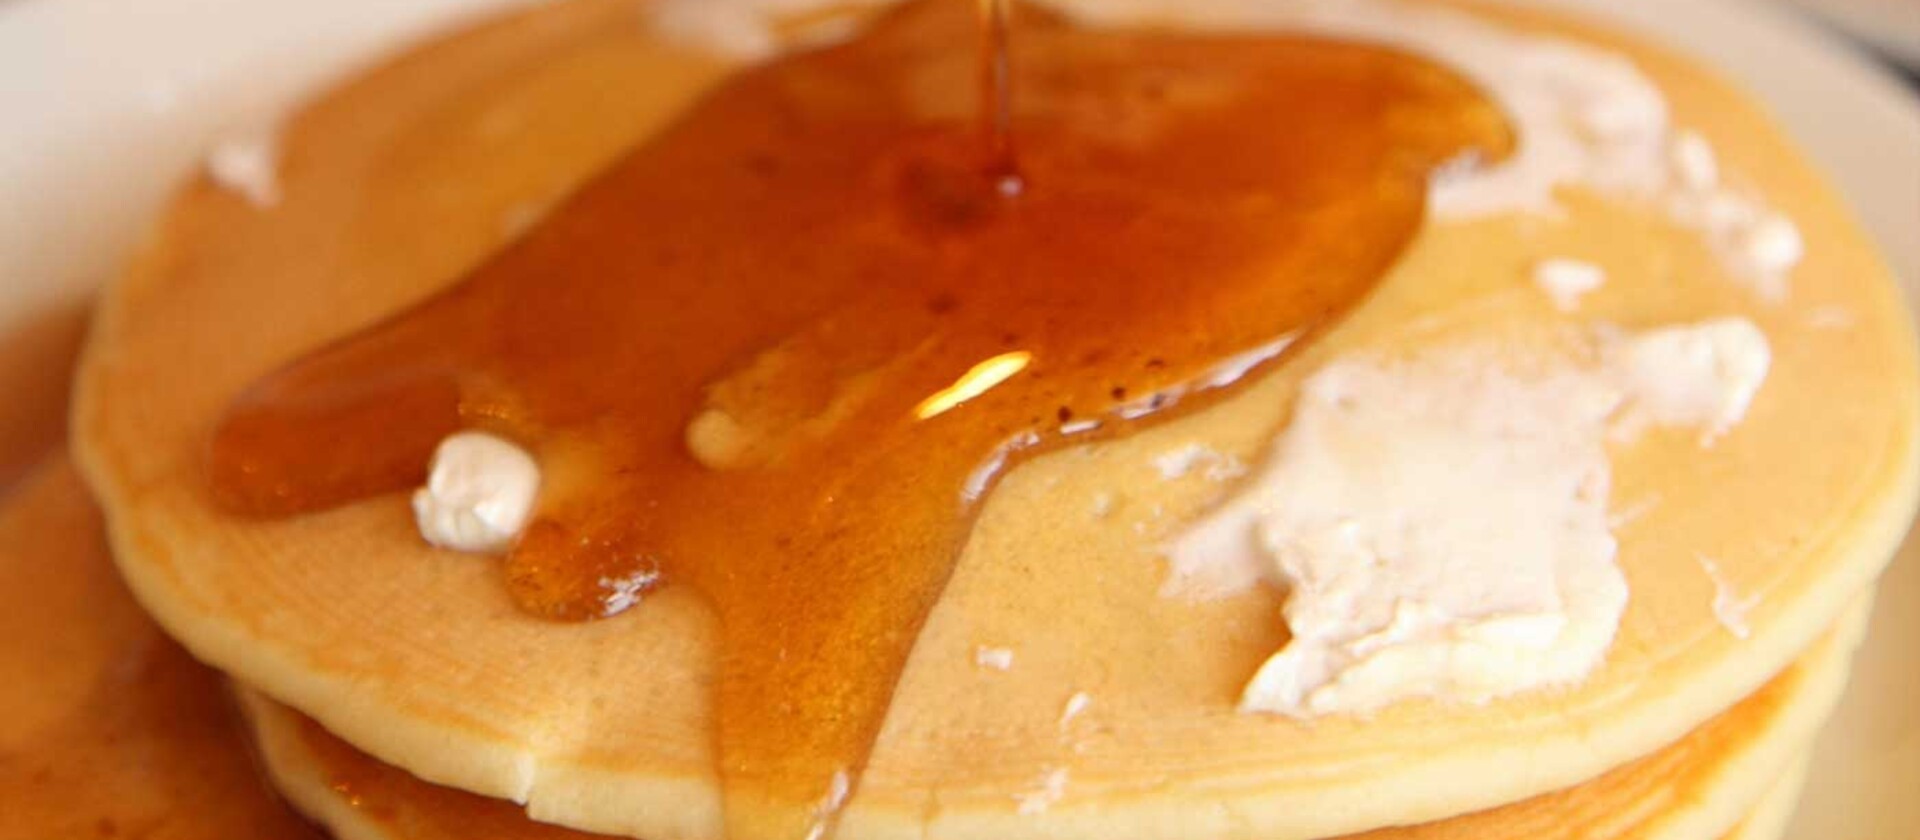 Sweet & Sticky: St. Joseph Island is Home to the Best Maple Syrup